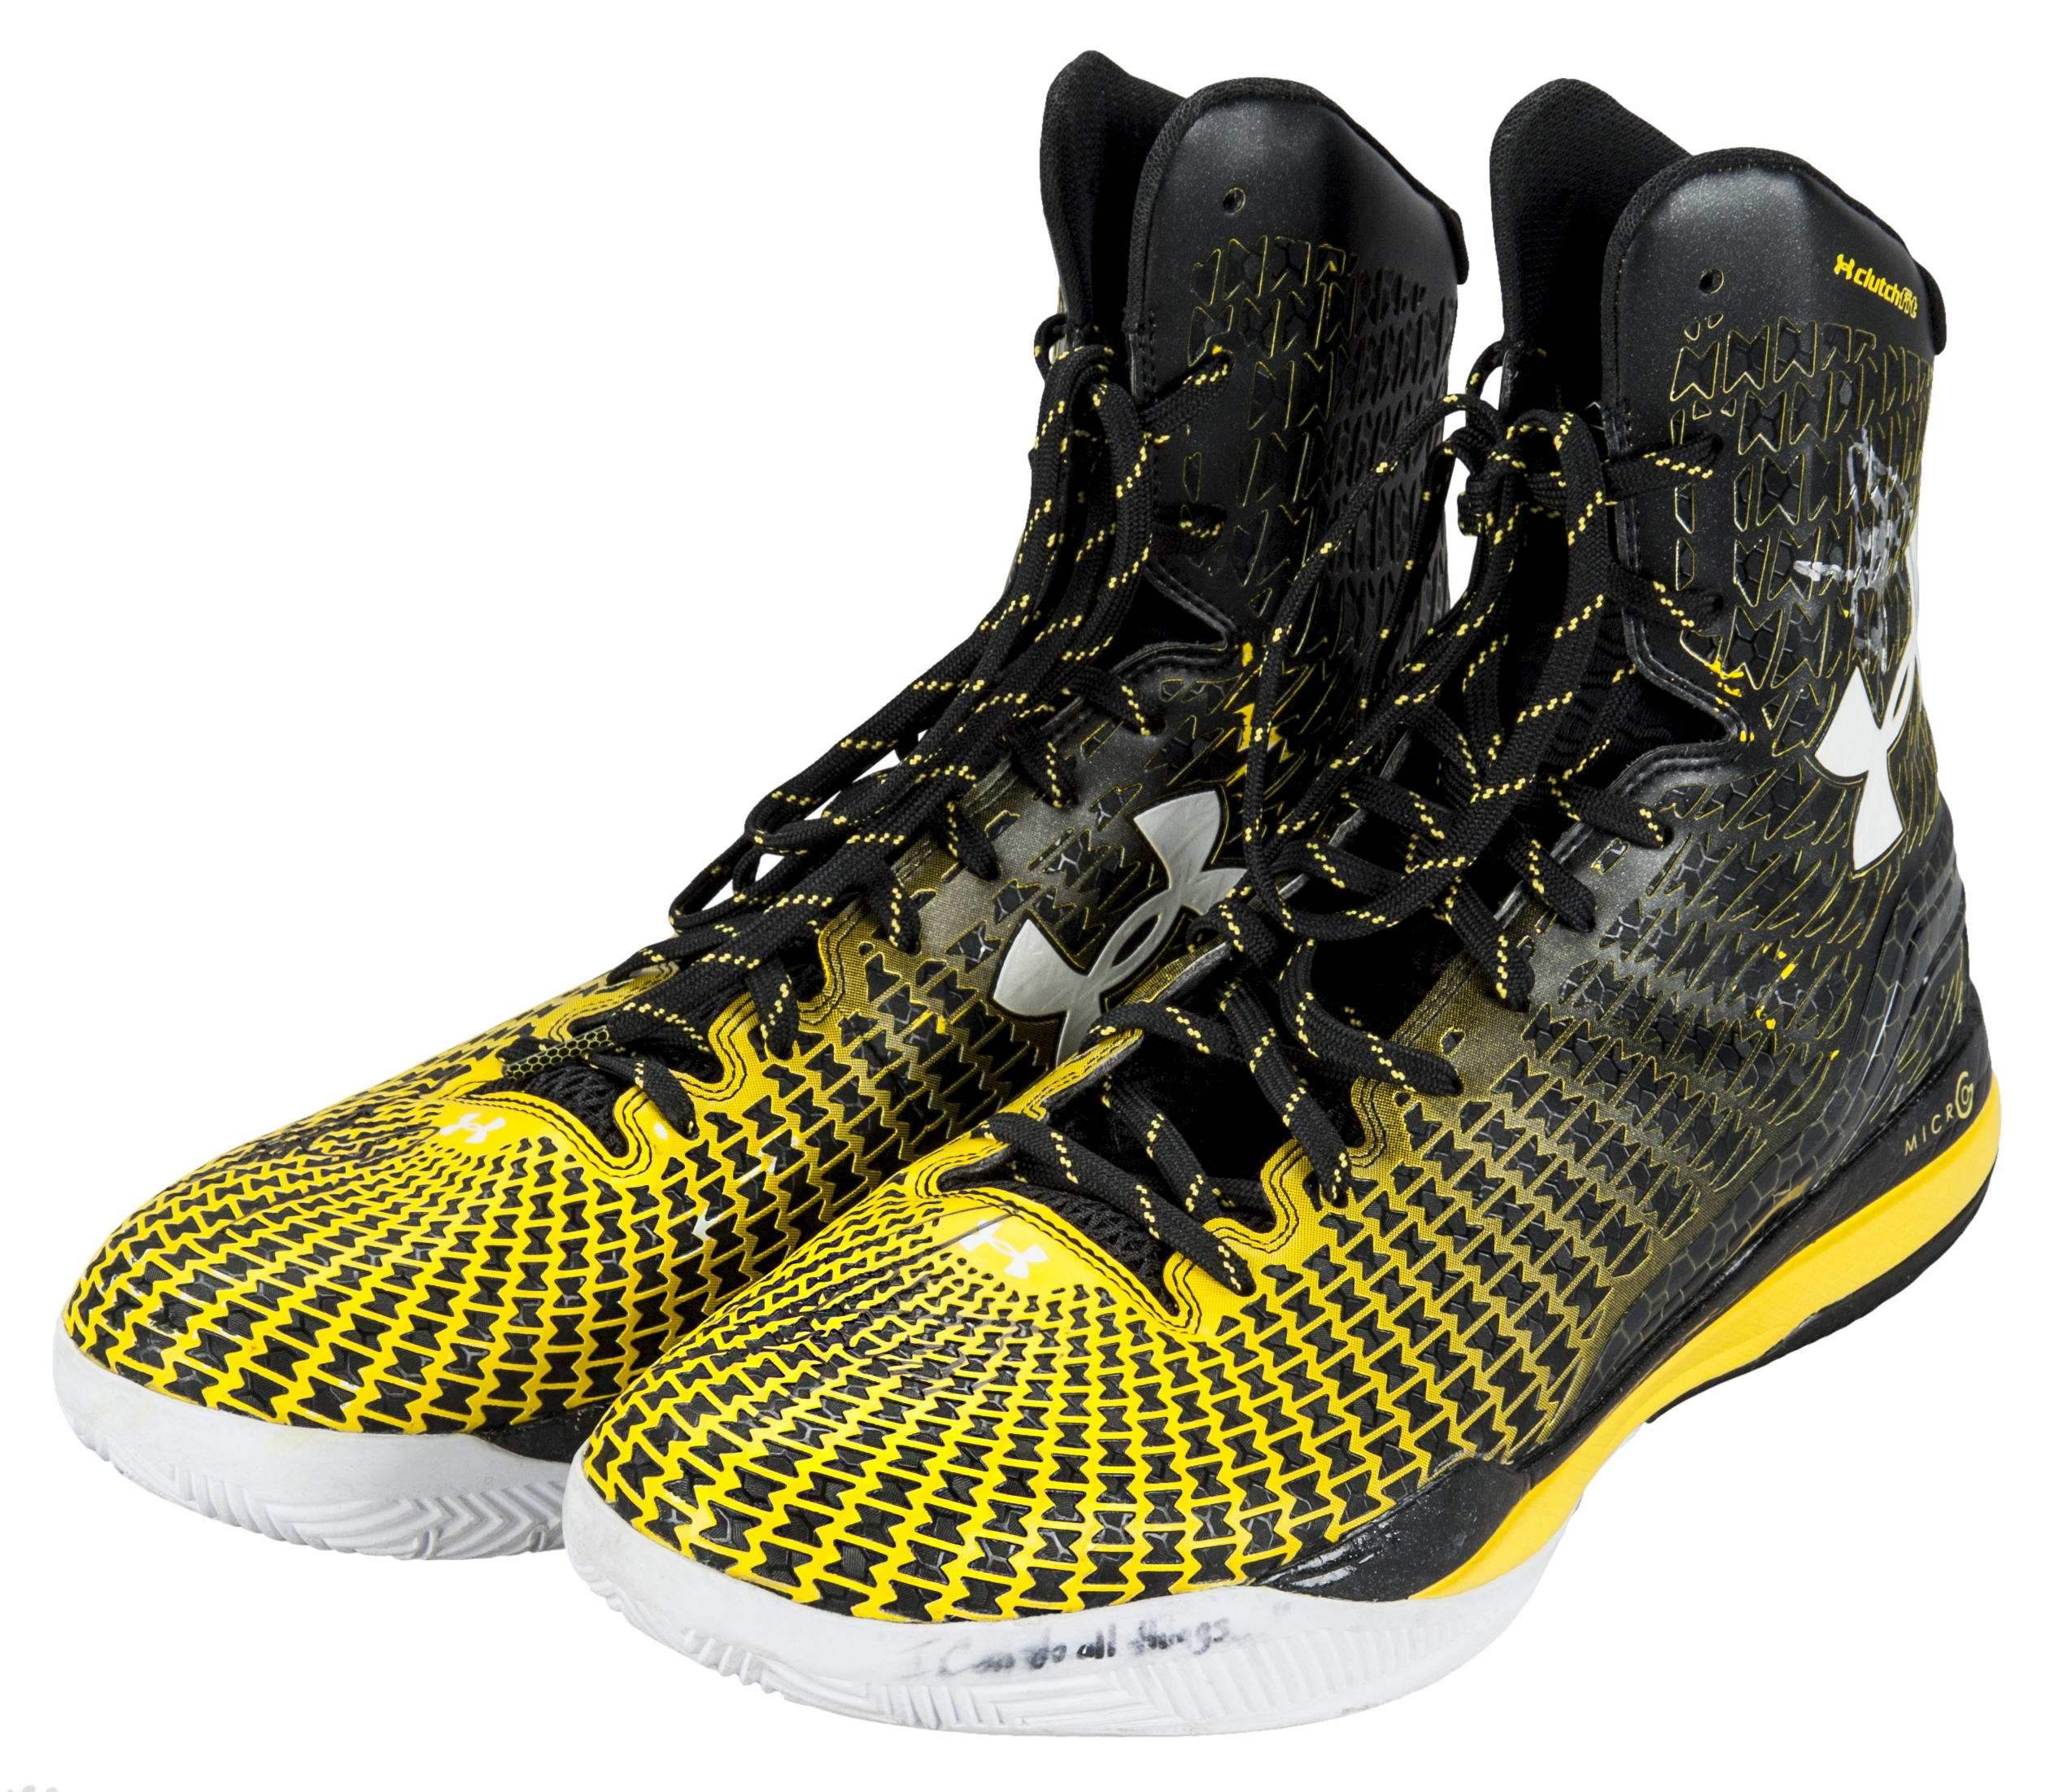 Warriors Star Steph Curry Laces Up in Artistic Sneakers With Initials of 